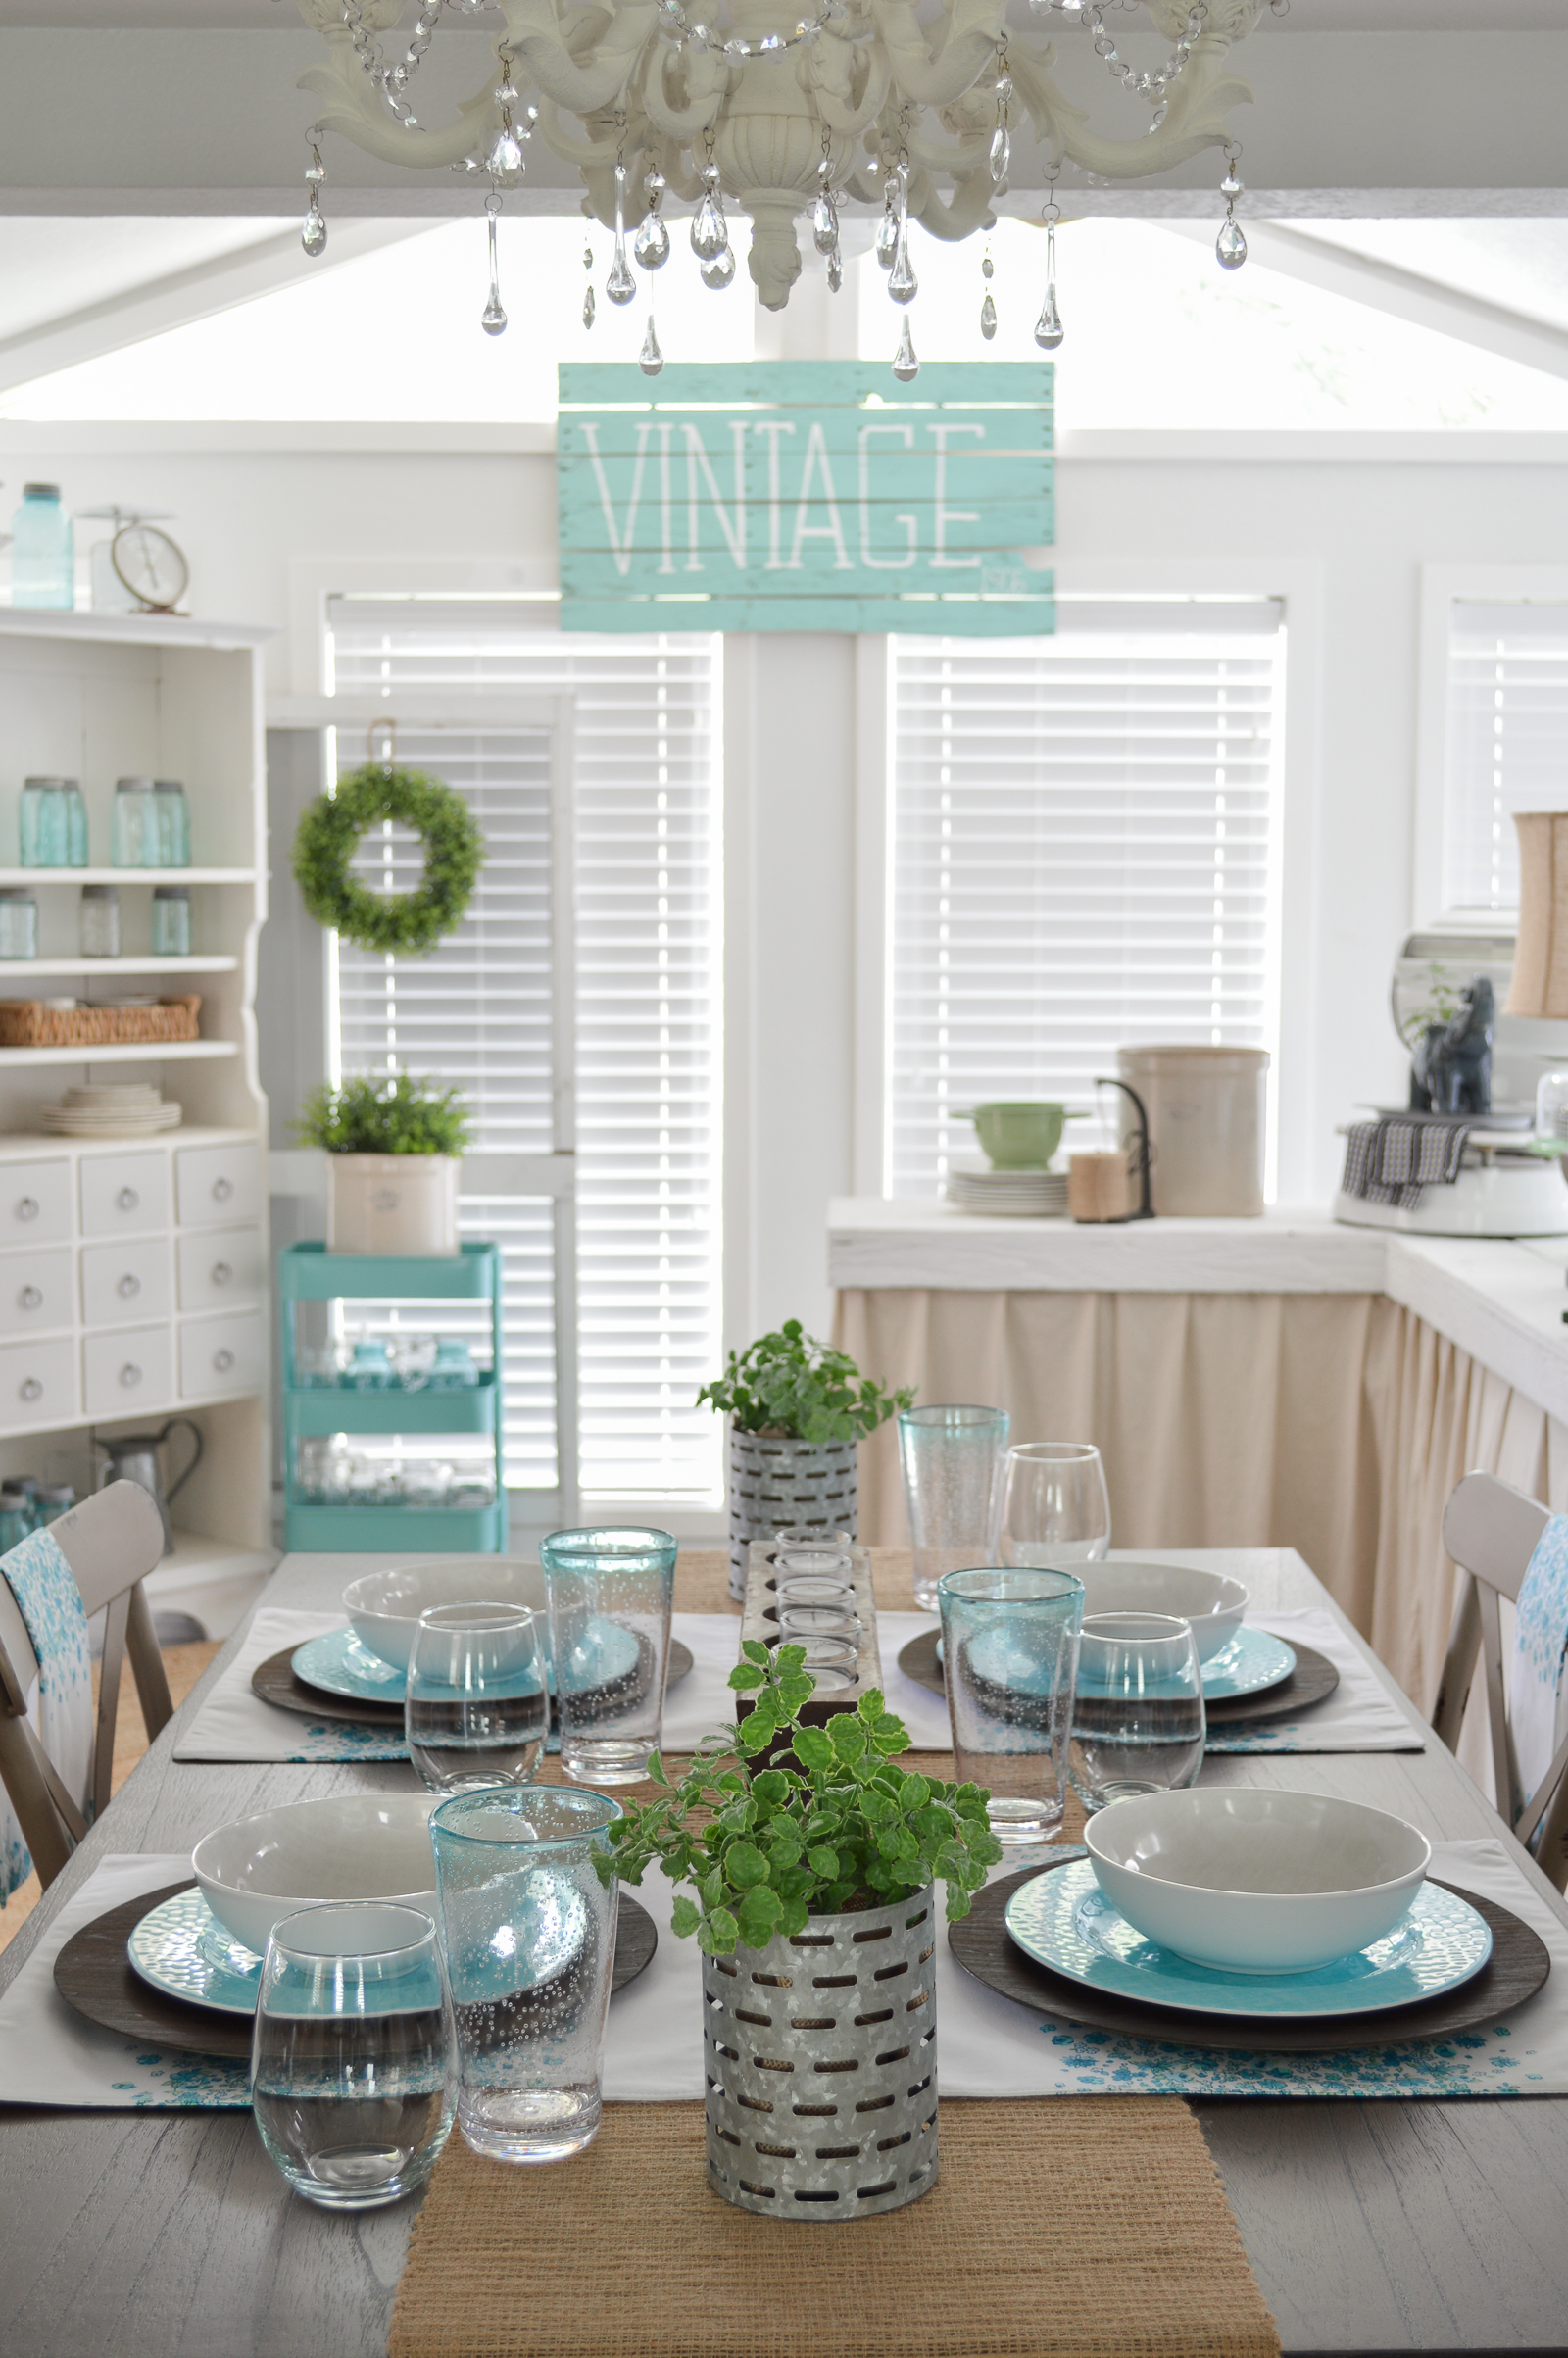 Farmhouse Style Decorating with Color | Easy ideas for adding color to neutral decor, featuring Better Homes & Gardens good, found at Walmart! Affordable cottage farm house dining table #sponsored 